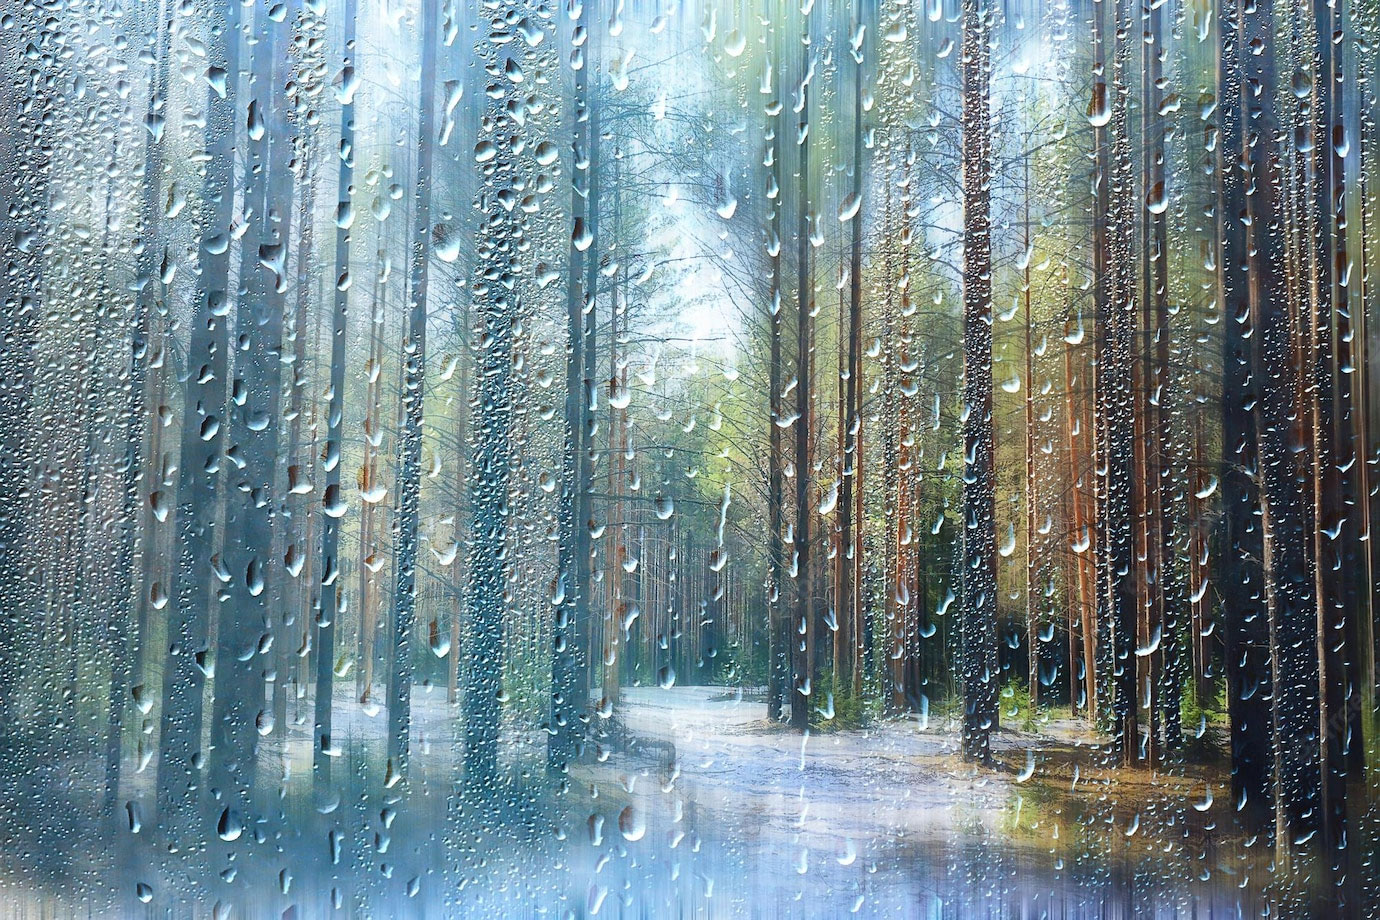 Image shows rain beading on window looking out onto a forest of tress